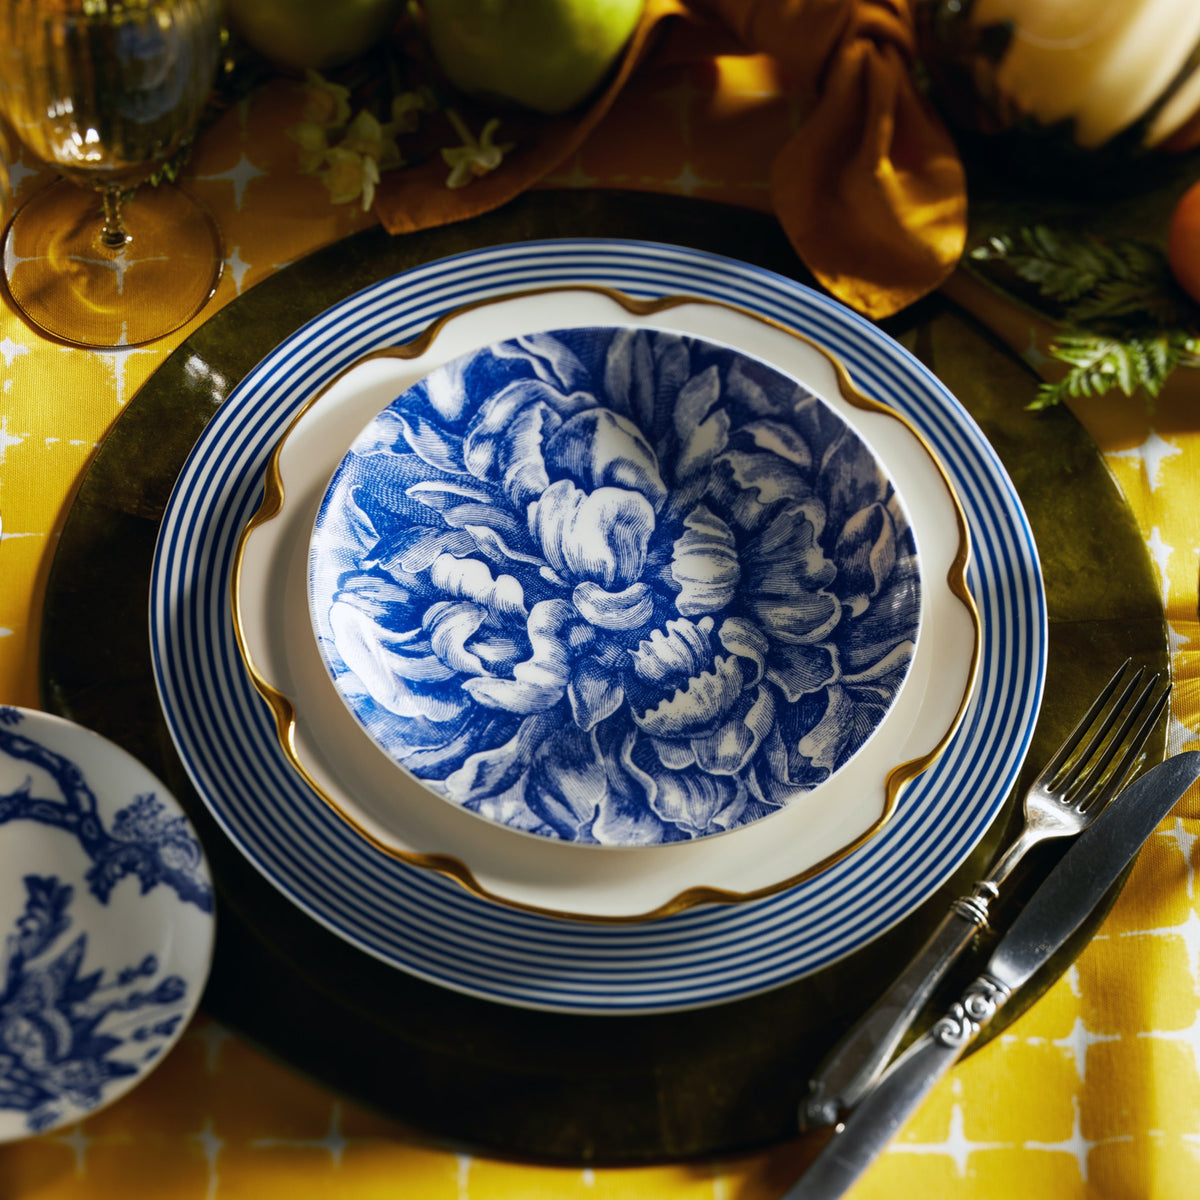 A close-up view of a dinner setting featuring heirloom-quality blue and white floral-patterned Peony Small Plates by Caskata Artisanal Home, positioned on a larger blue-striped plate, with a fork and knife thoughtfully placed on the right side.